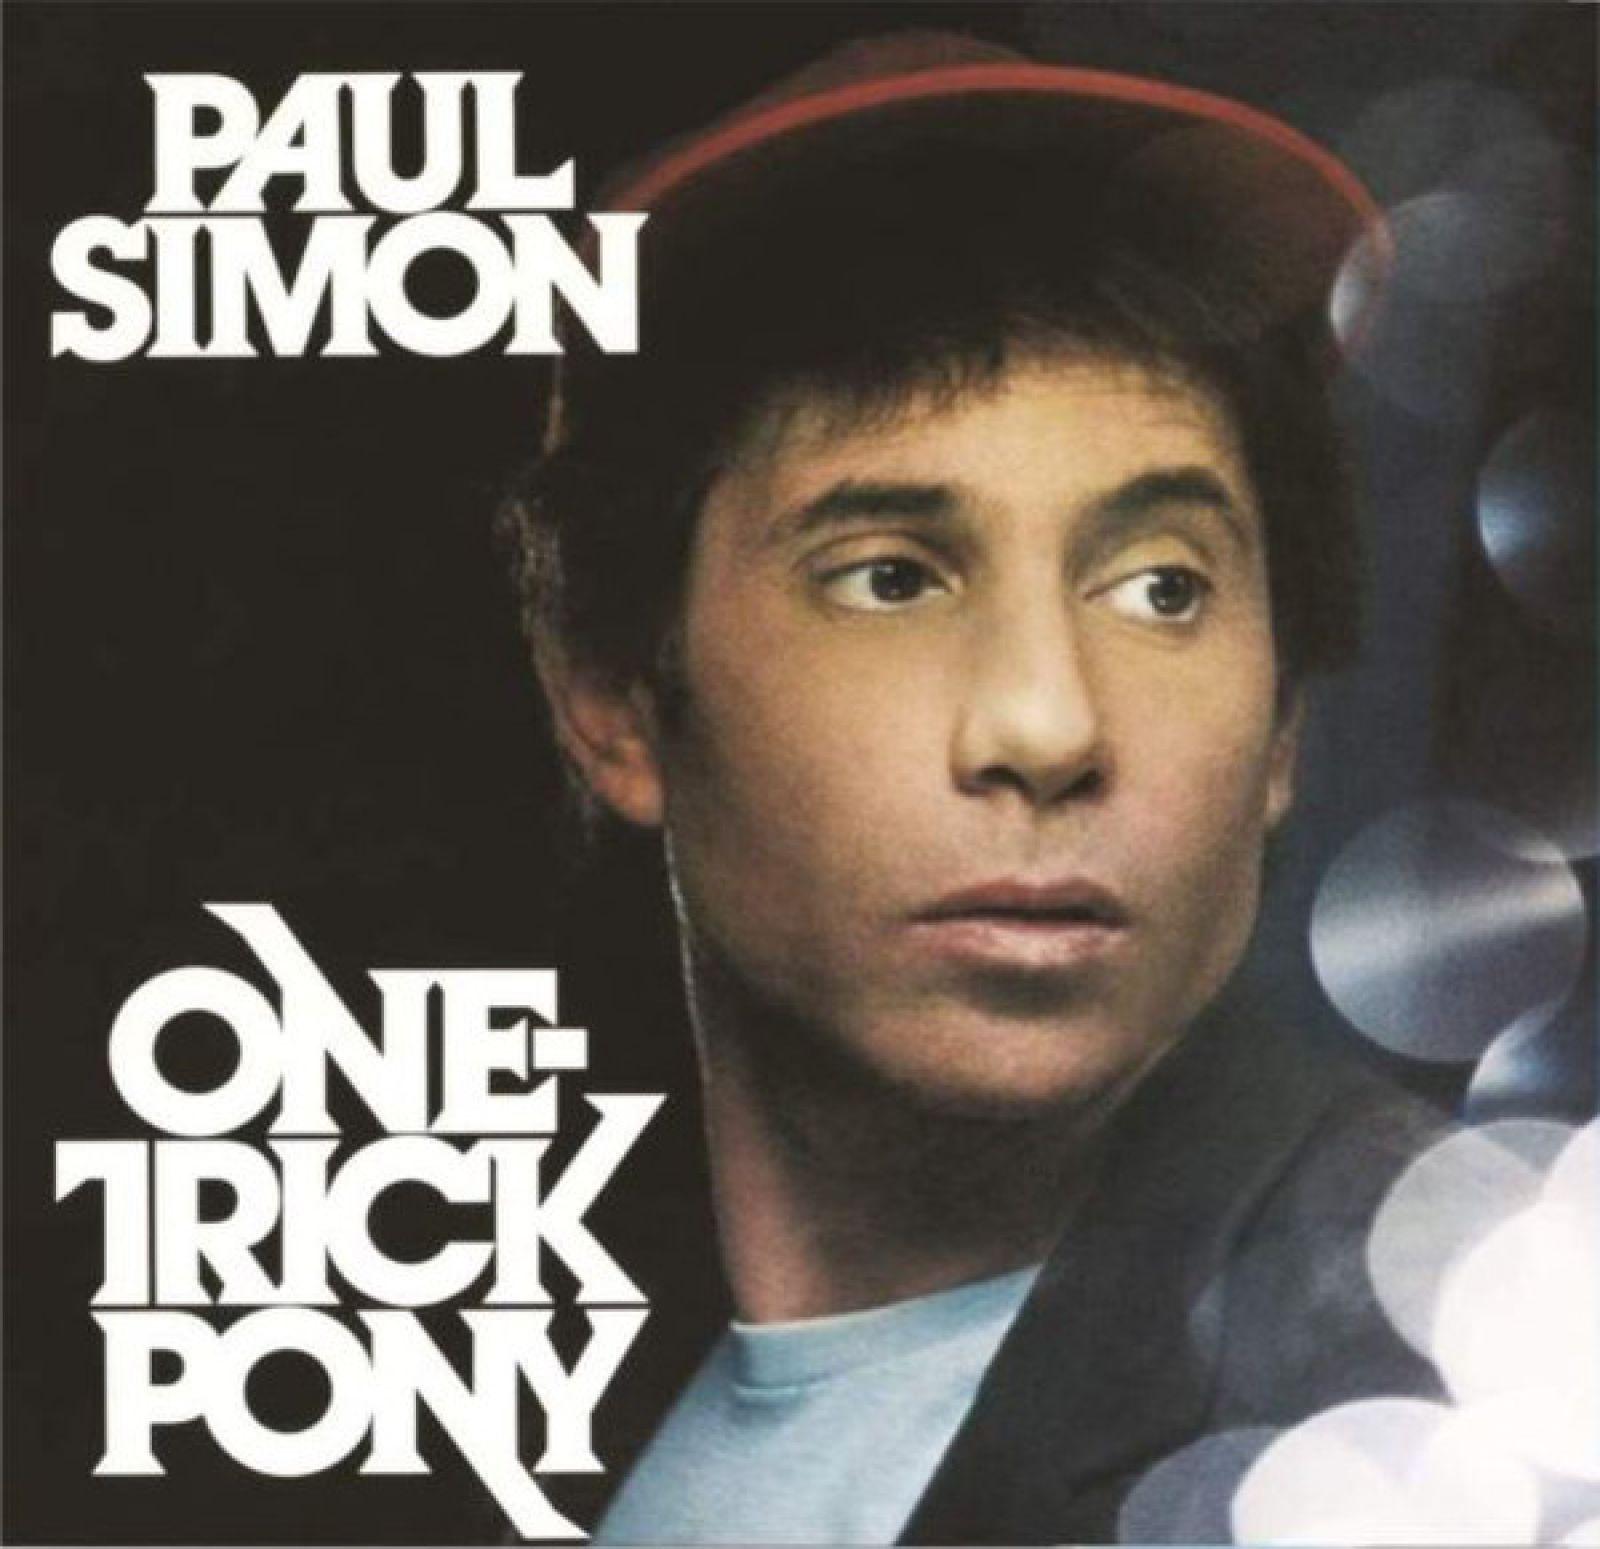 Selected image for PAUL SIMON - One Trick Pony